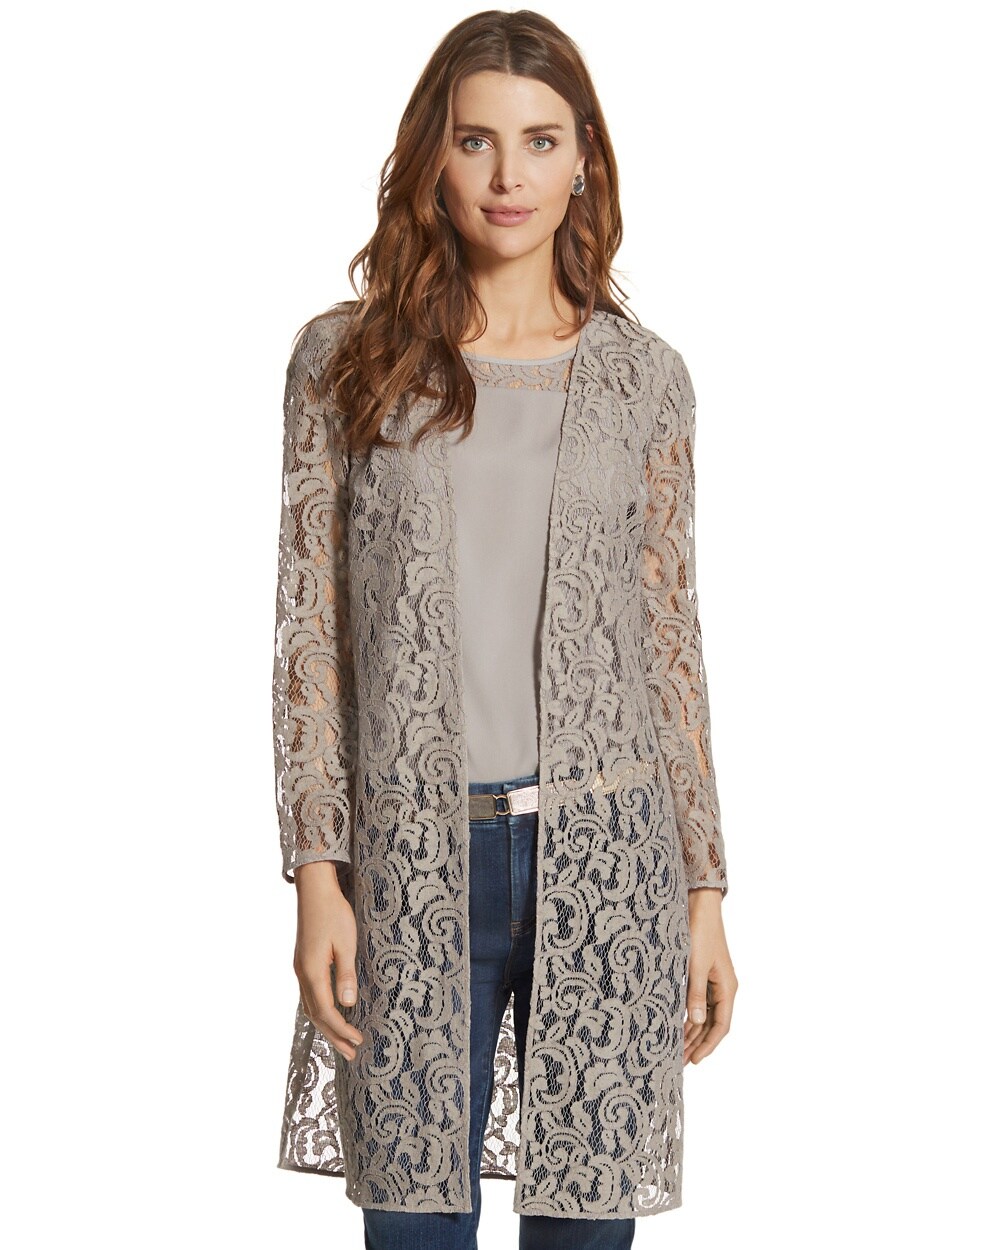 Exquisite Lace Duster Jacket - Chico's